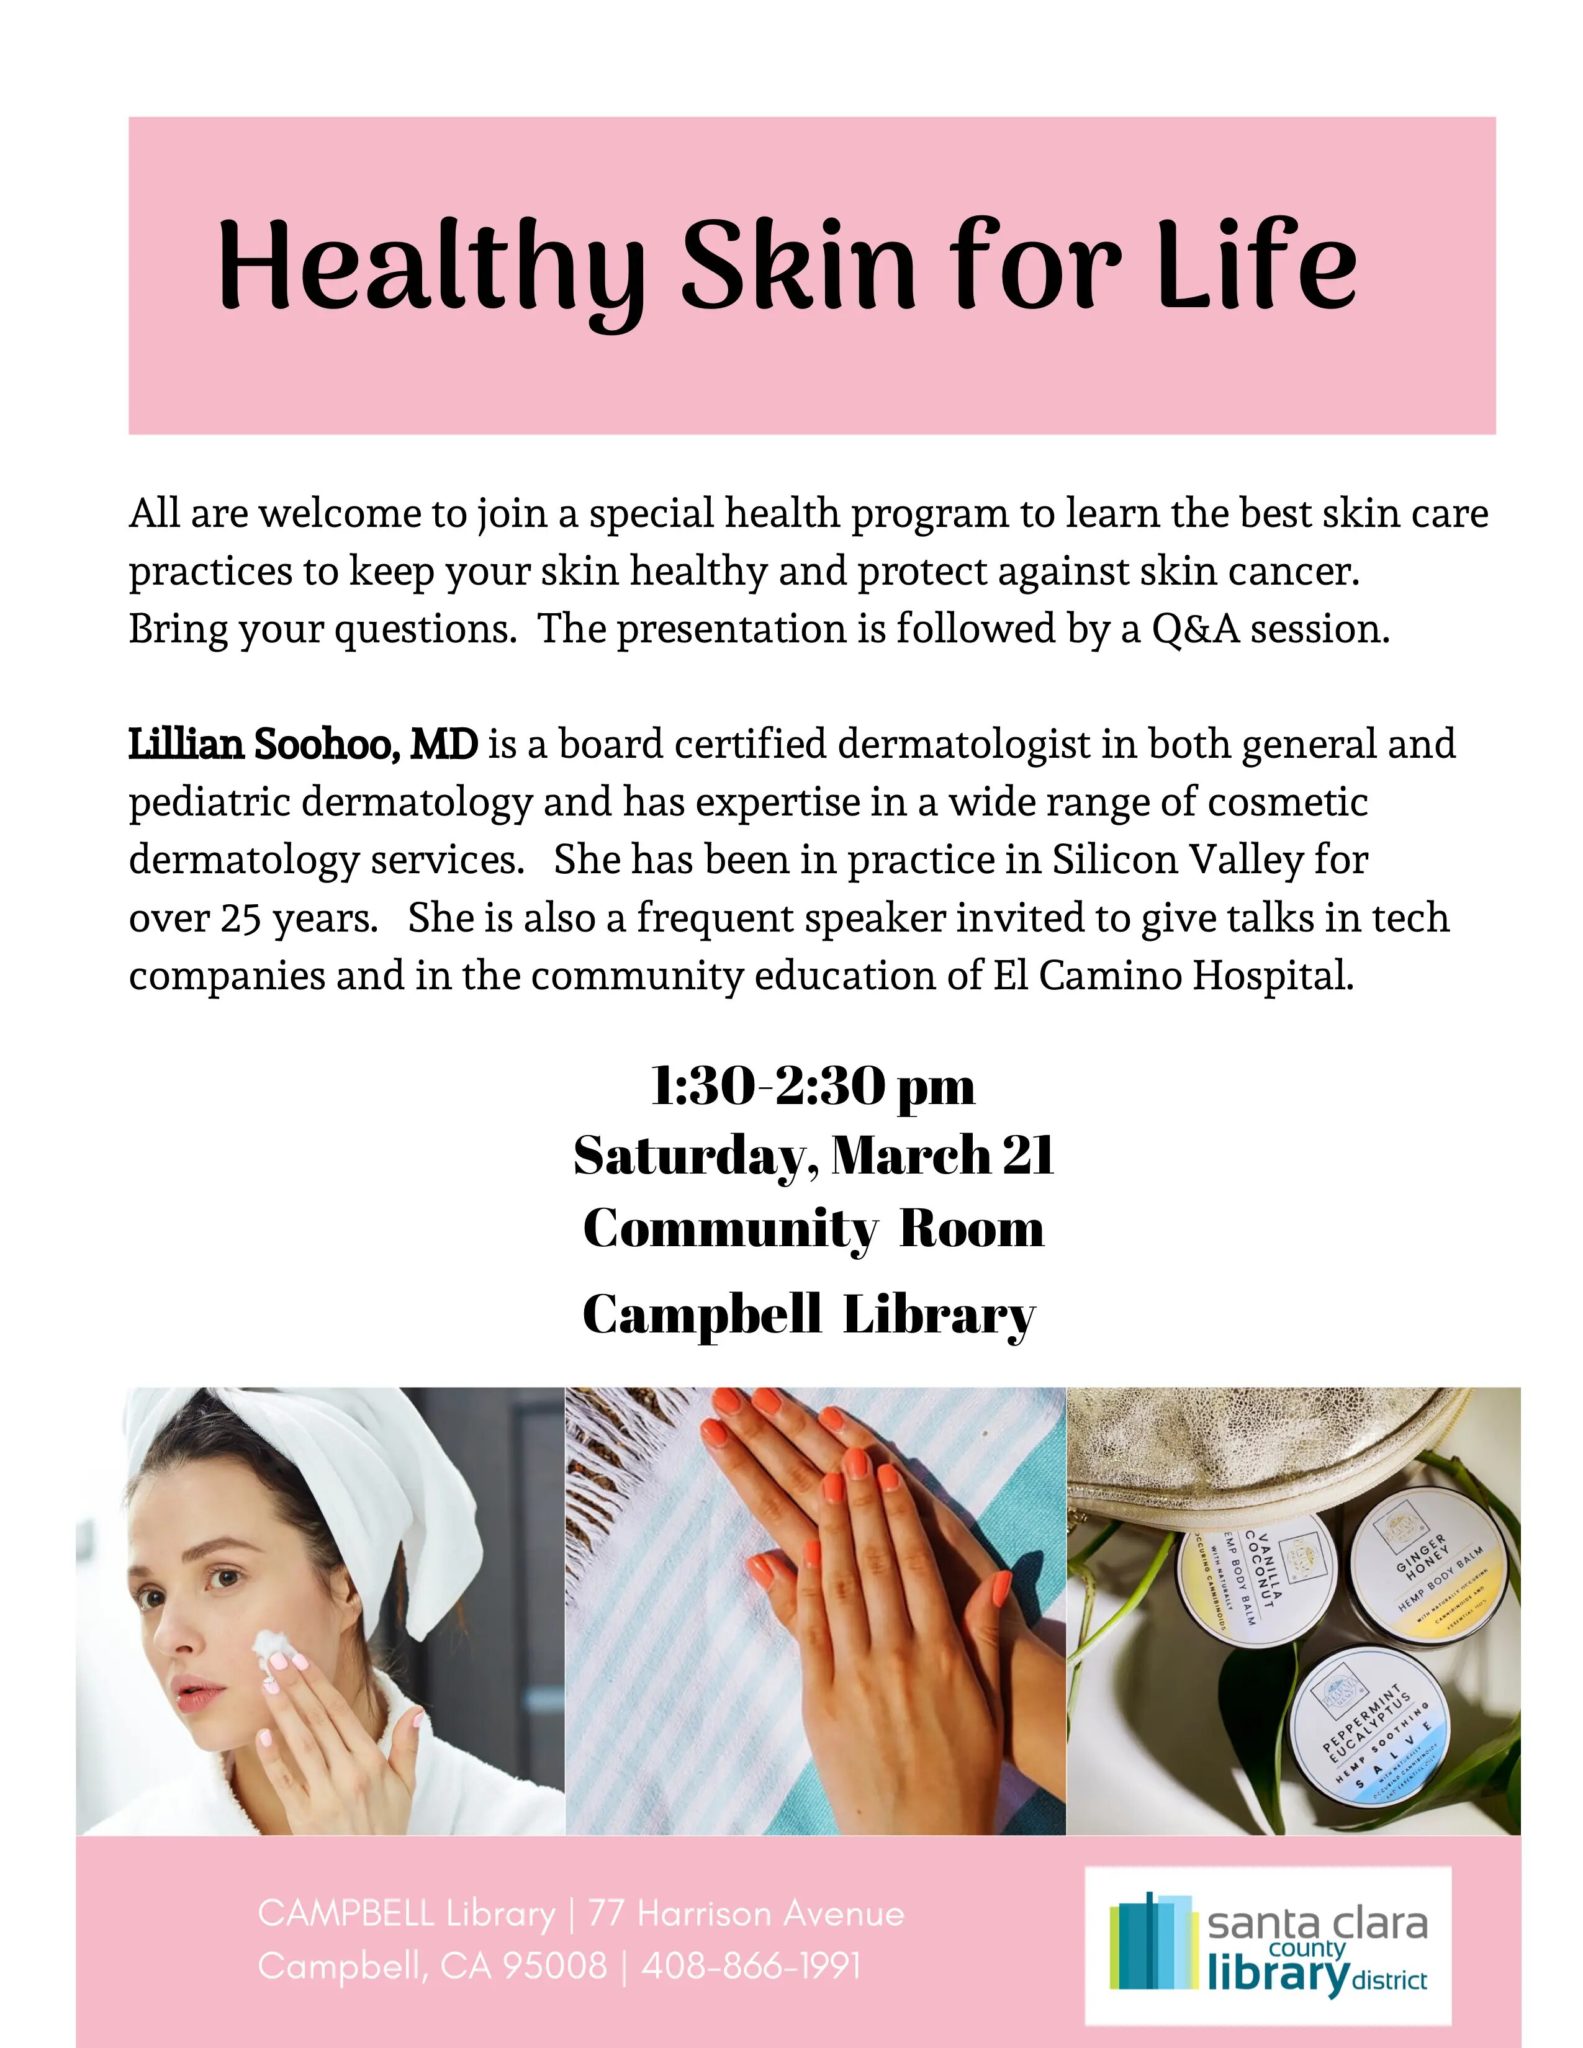 3 21 2020 campbell library healthy skin for life scaled.jpg